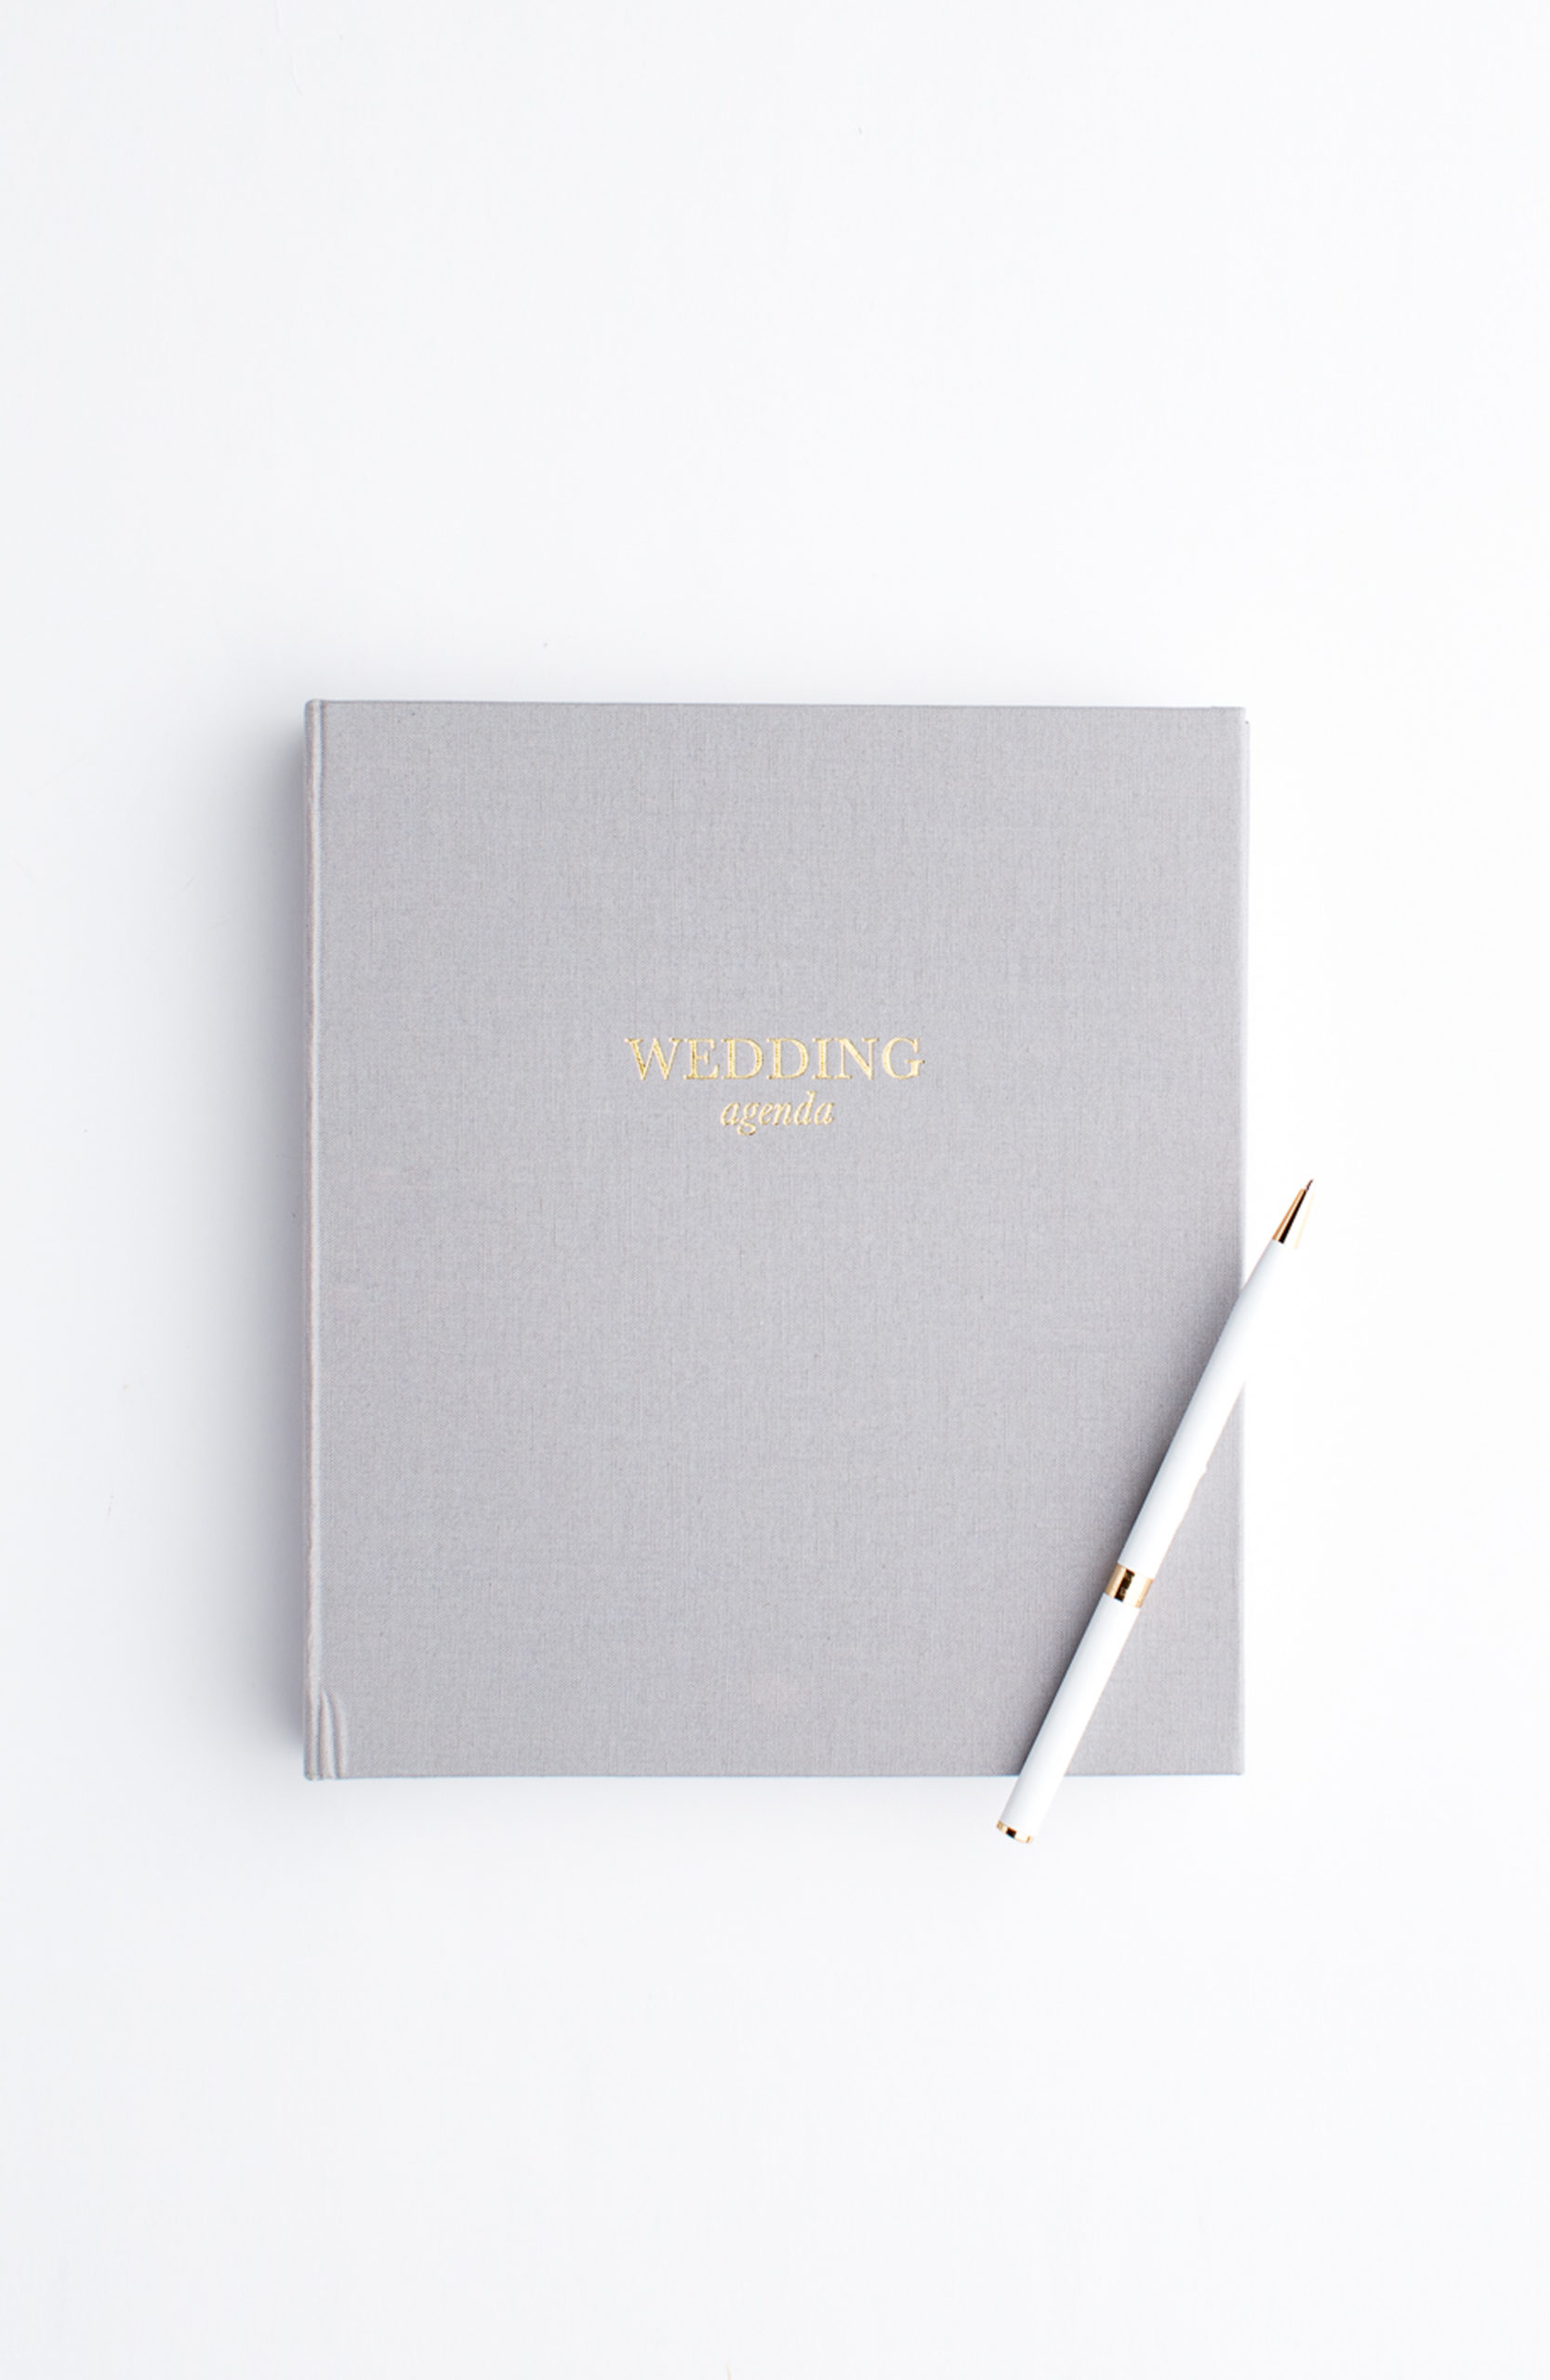 photo of a wedding planner book and pen